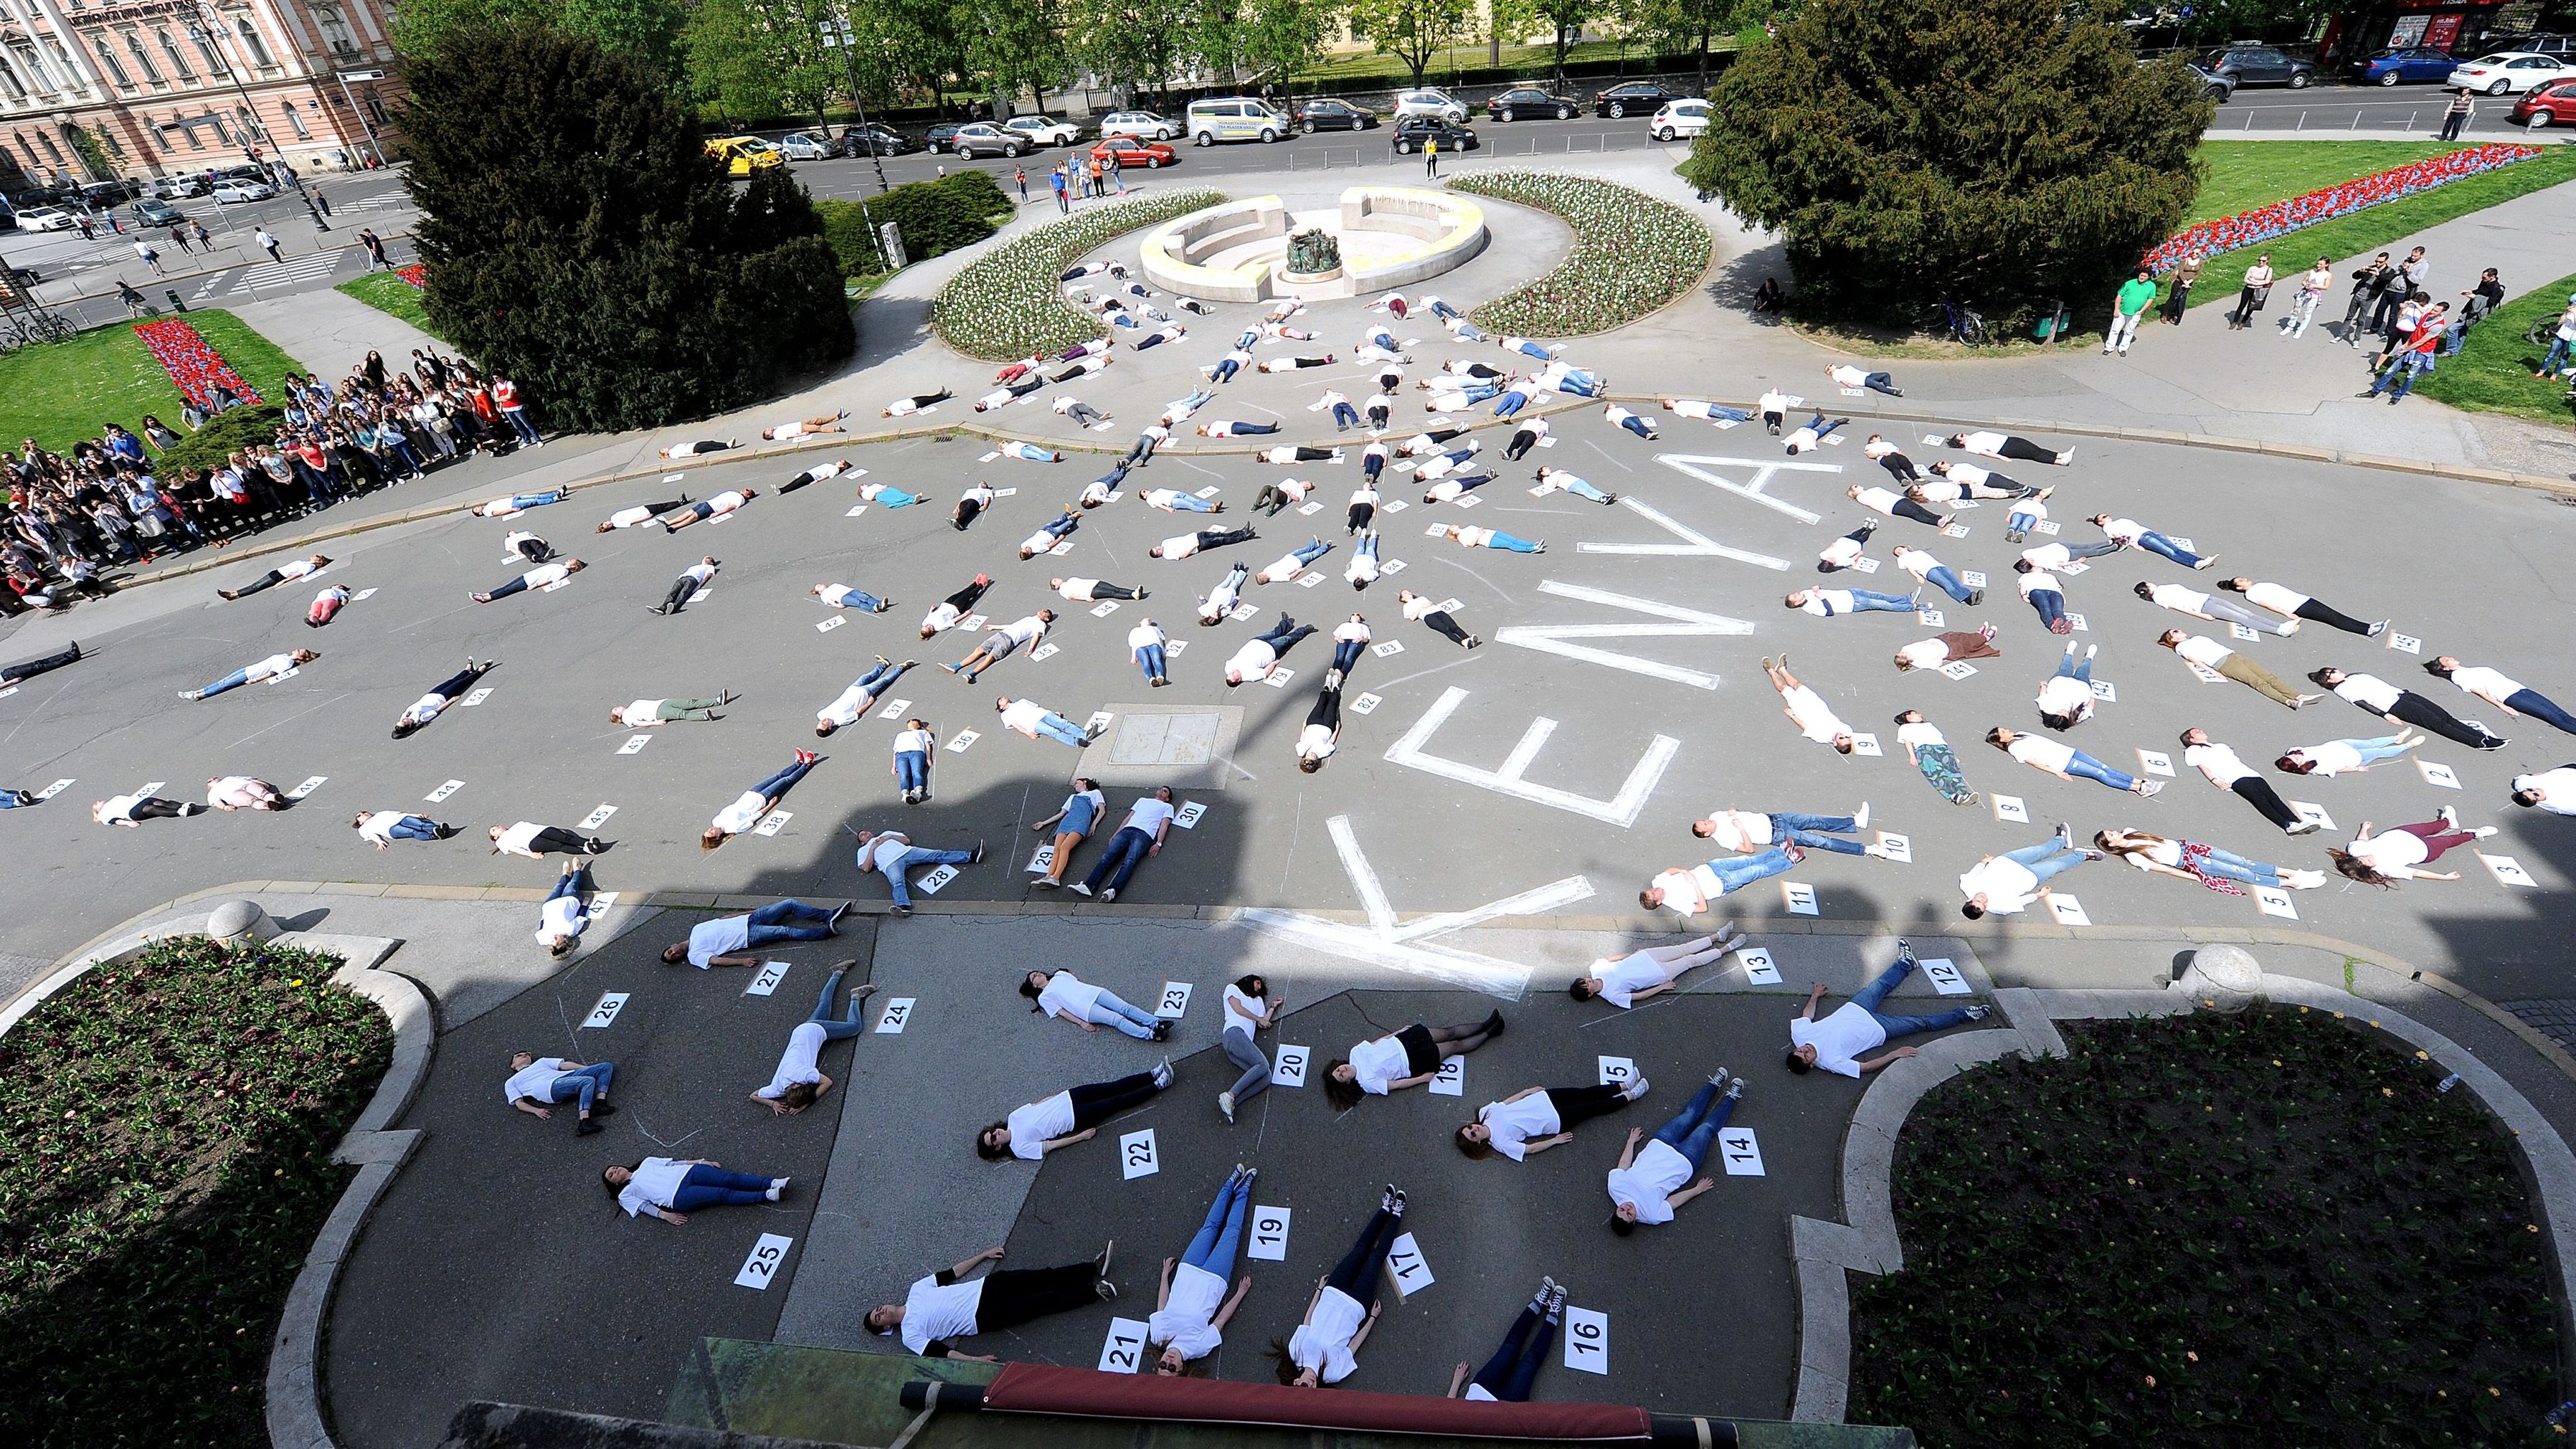 147 Croatian students lie on the ground for 147 seconds in front of the Zagreb University building in Zagreb, Croatia, on April 16, 2015, to voice solidarity with the victims of an attack on Garissa University. 